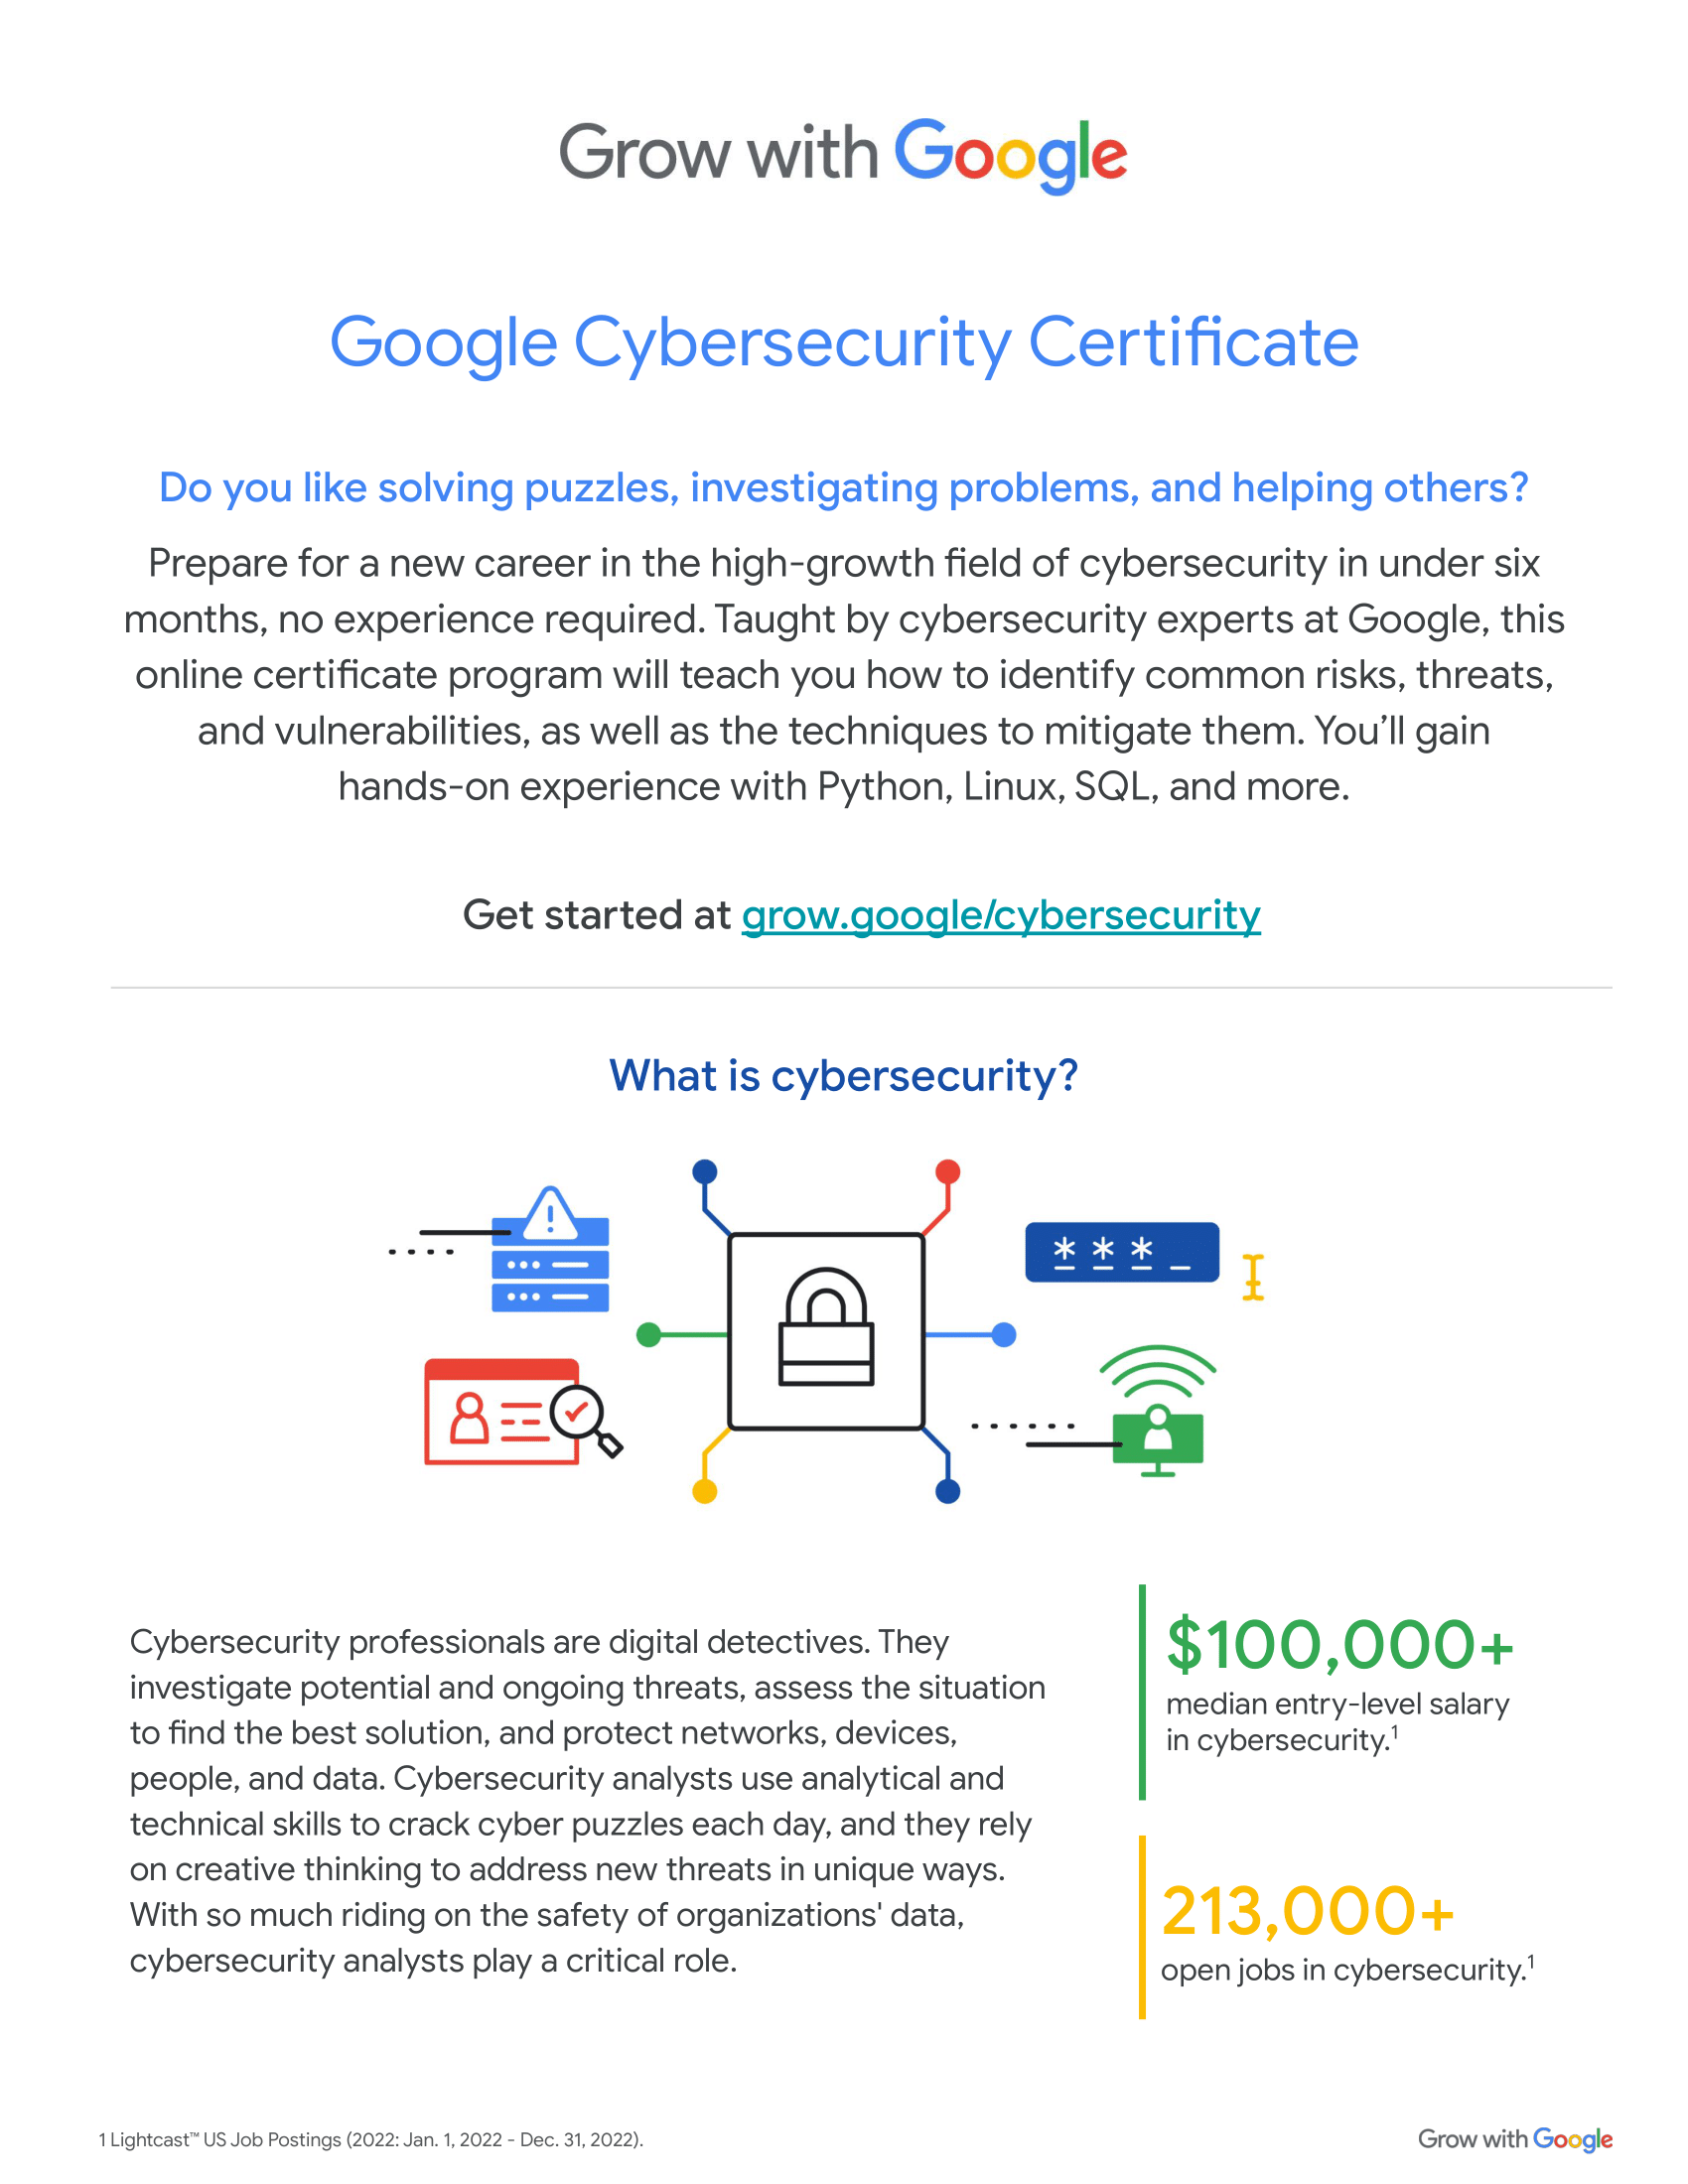 Grow with Google Launches Cybersecurity Certificate — The National